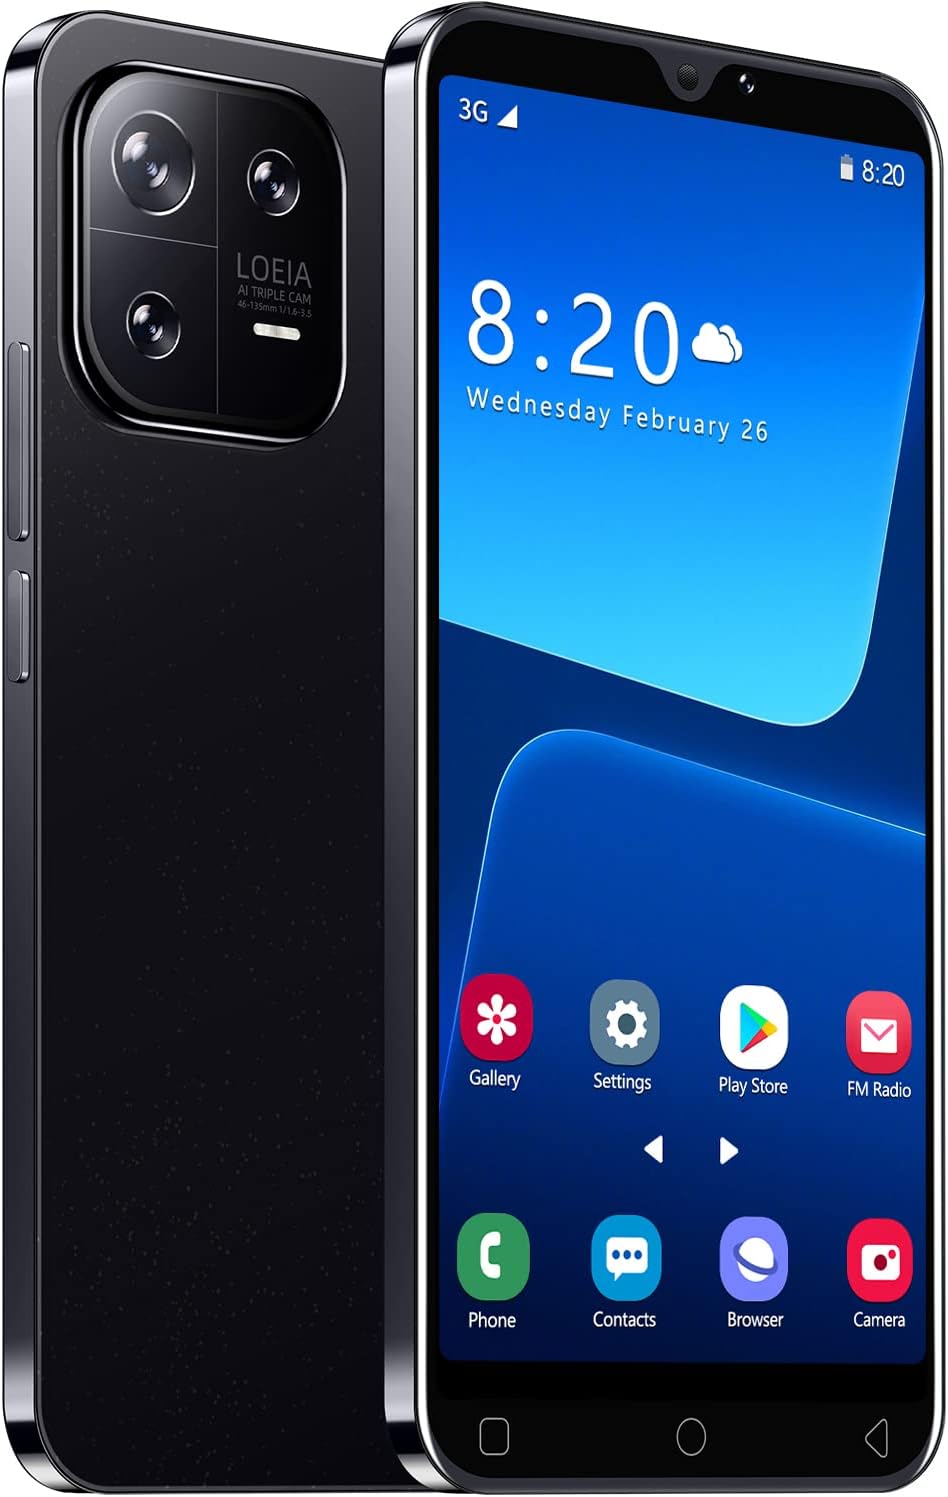 F2FTlk Cheap Mobile Phones，M13Pro 5.0“ Android 8.1 Smartphone, 16GB ROM(Extendable to 128GB,Dual SIM Dual Camera, WiFi,Bluetooth,GPS Basic Cell Phones (M13Pro-Blue)